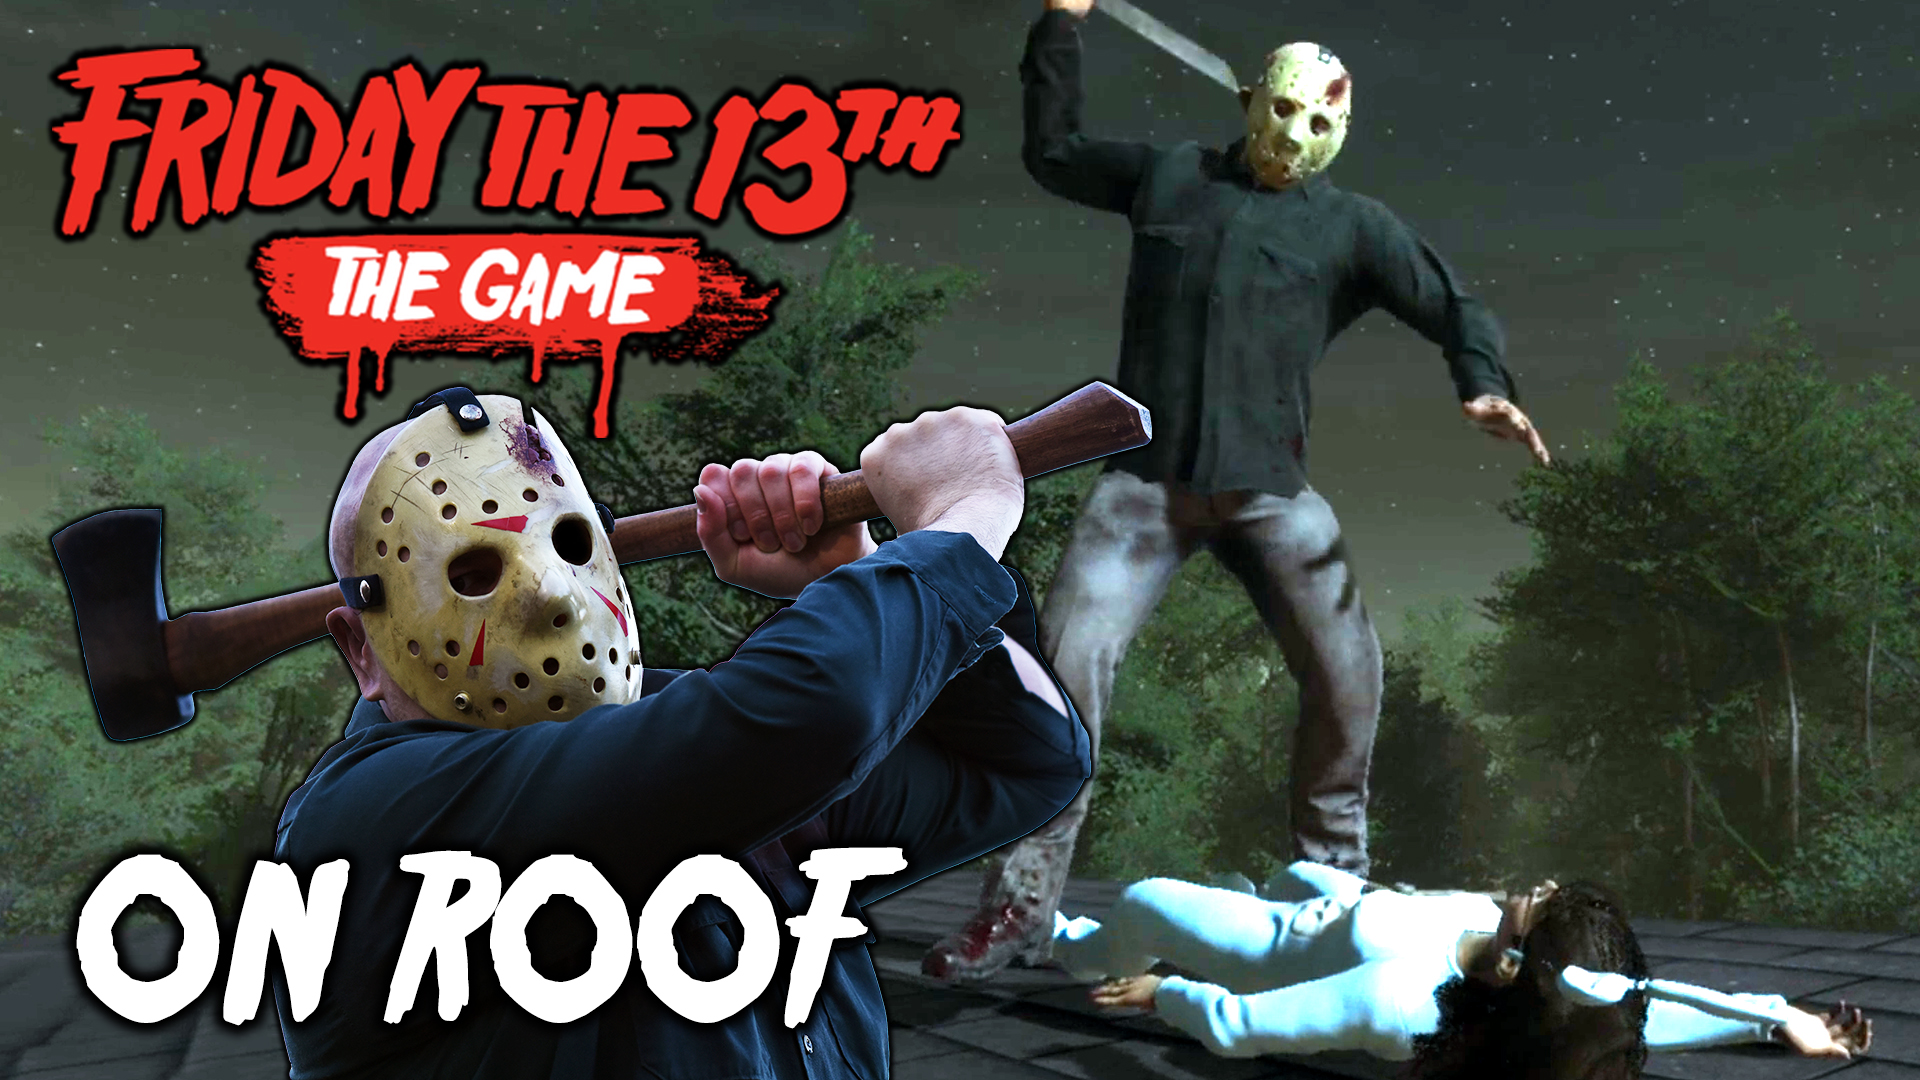 Jason On Roof <br>Friday the 13th: The Game